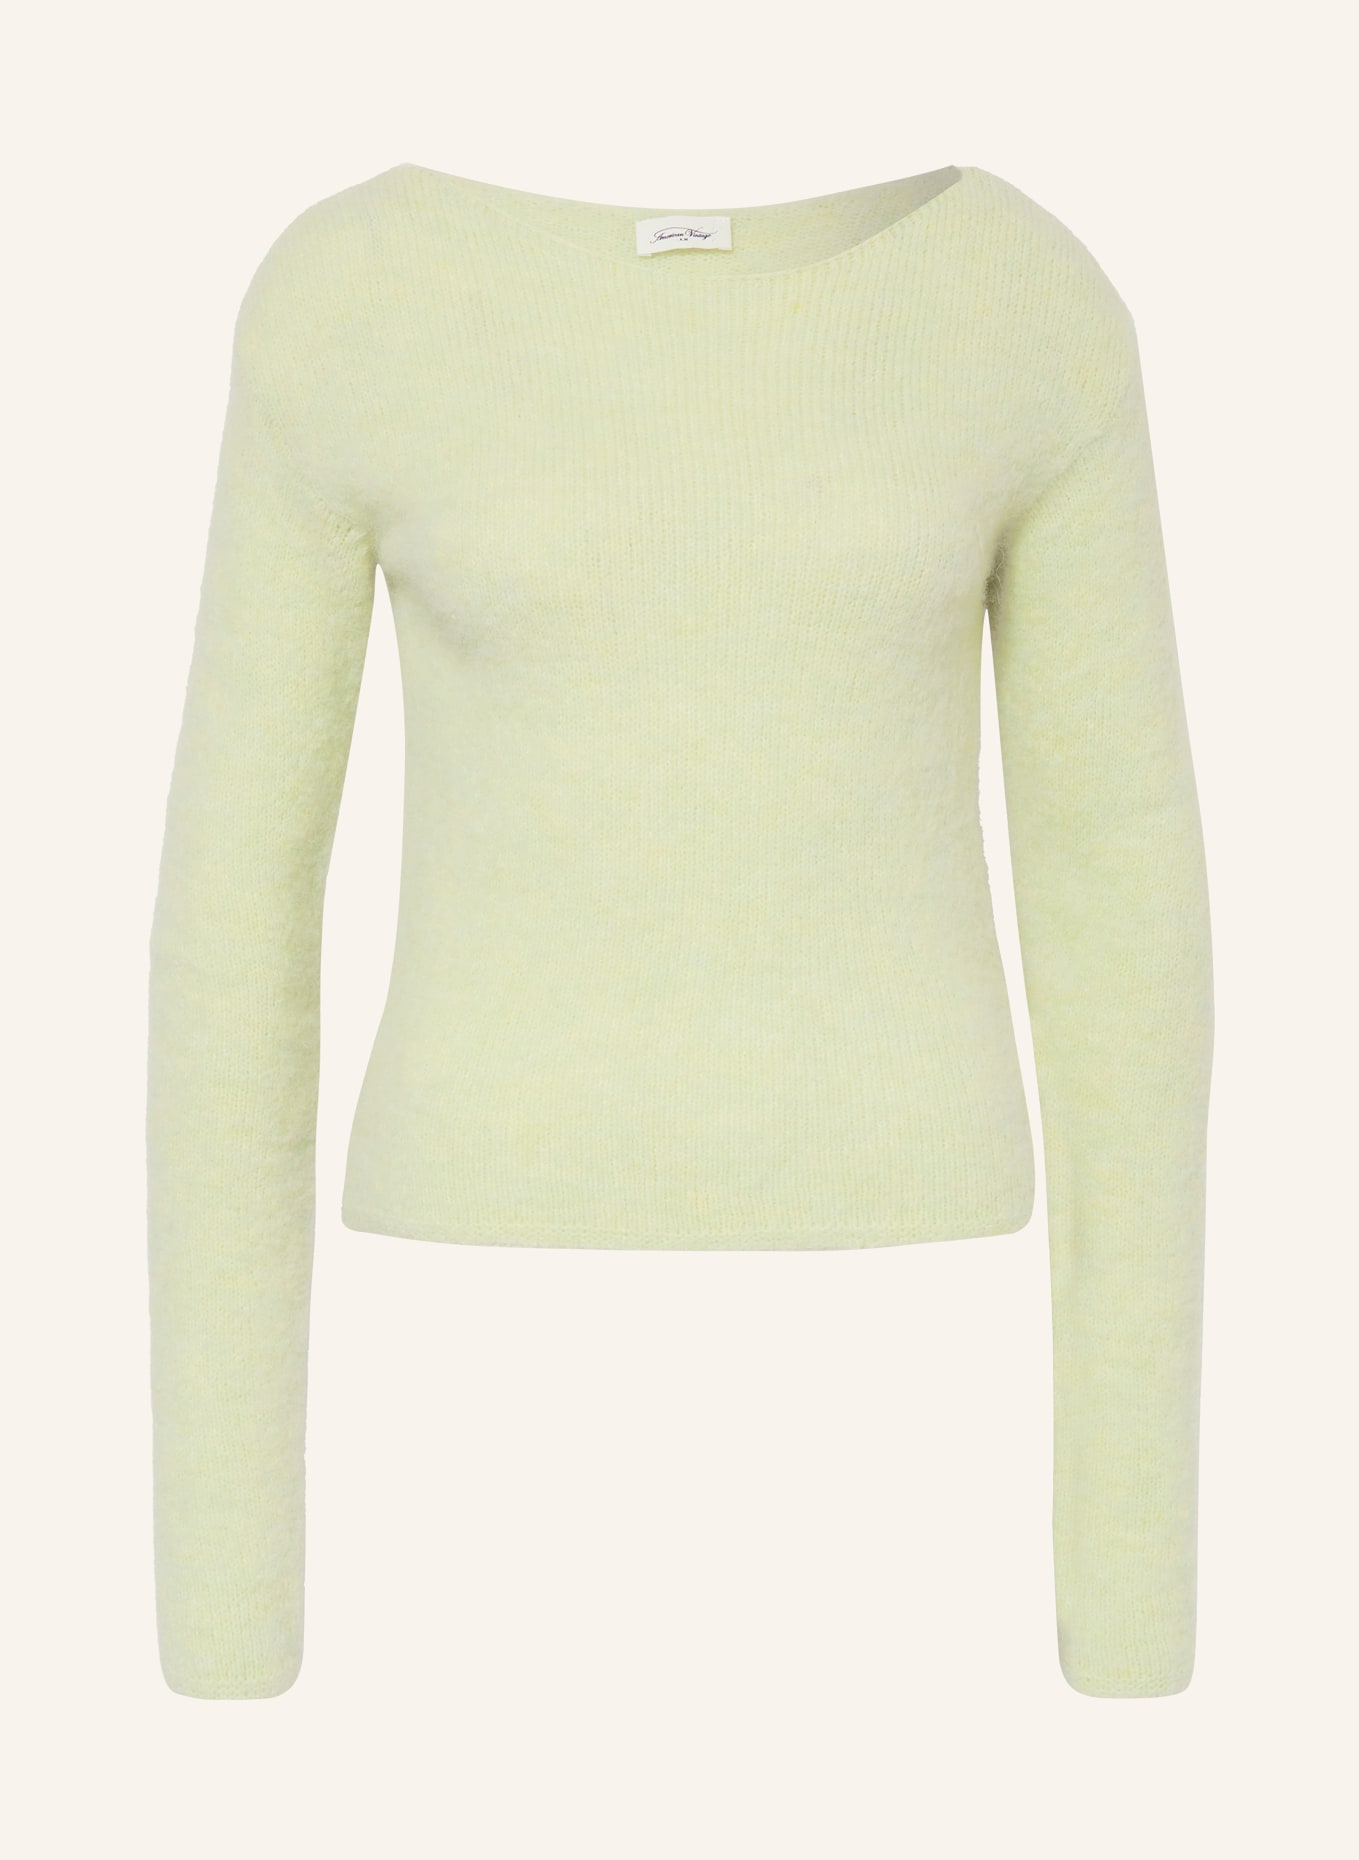 American Vintage Knitted pullover, Color: LIGHT YELLOW (Image 1)